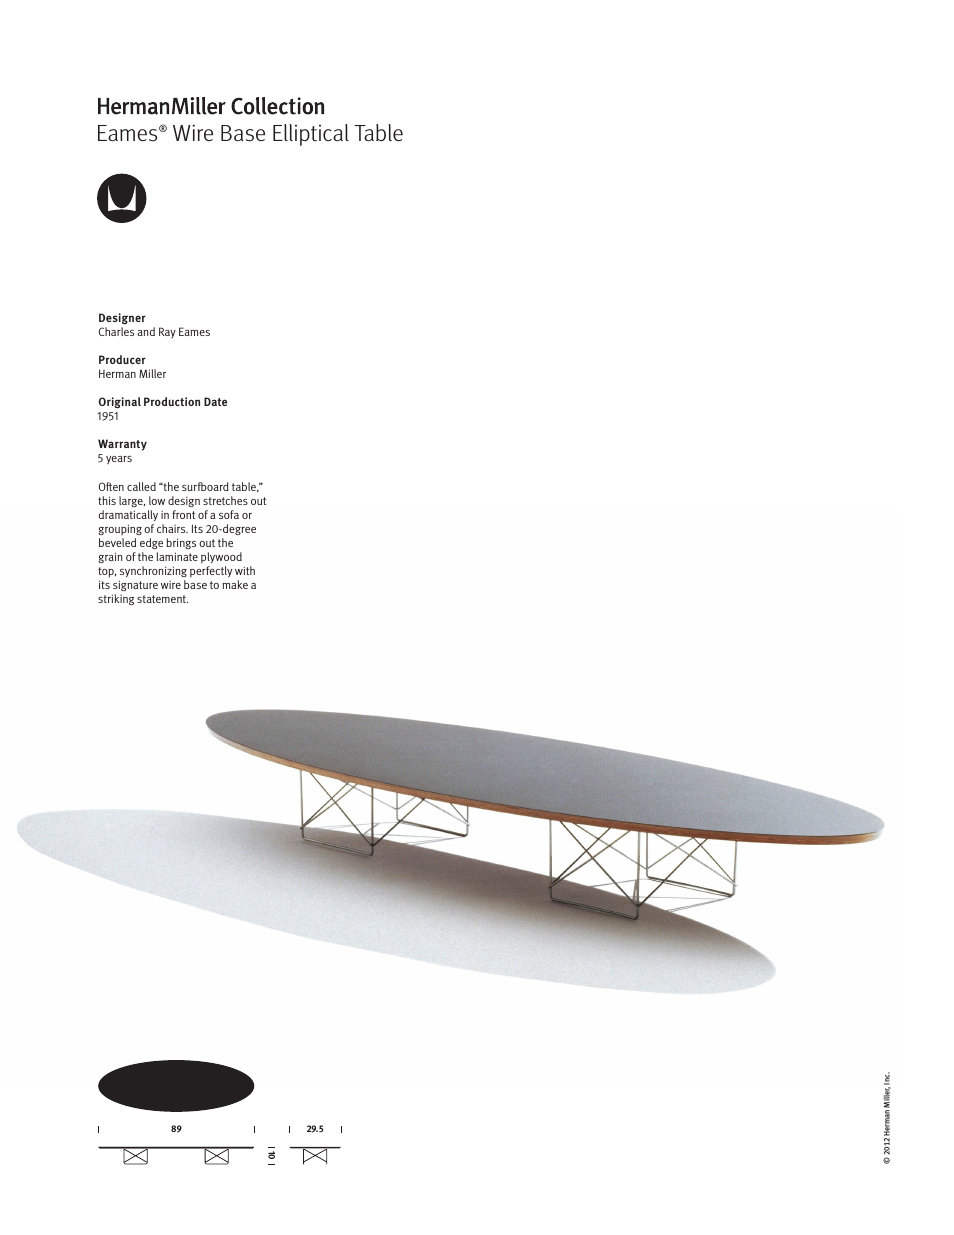 Eames Wire Base Elliptical Table - Product sheet